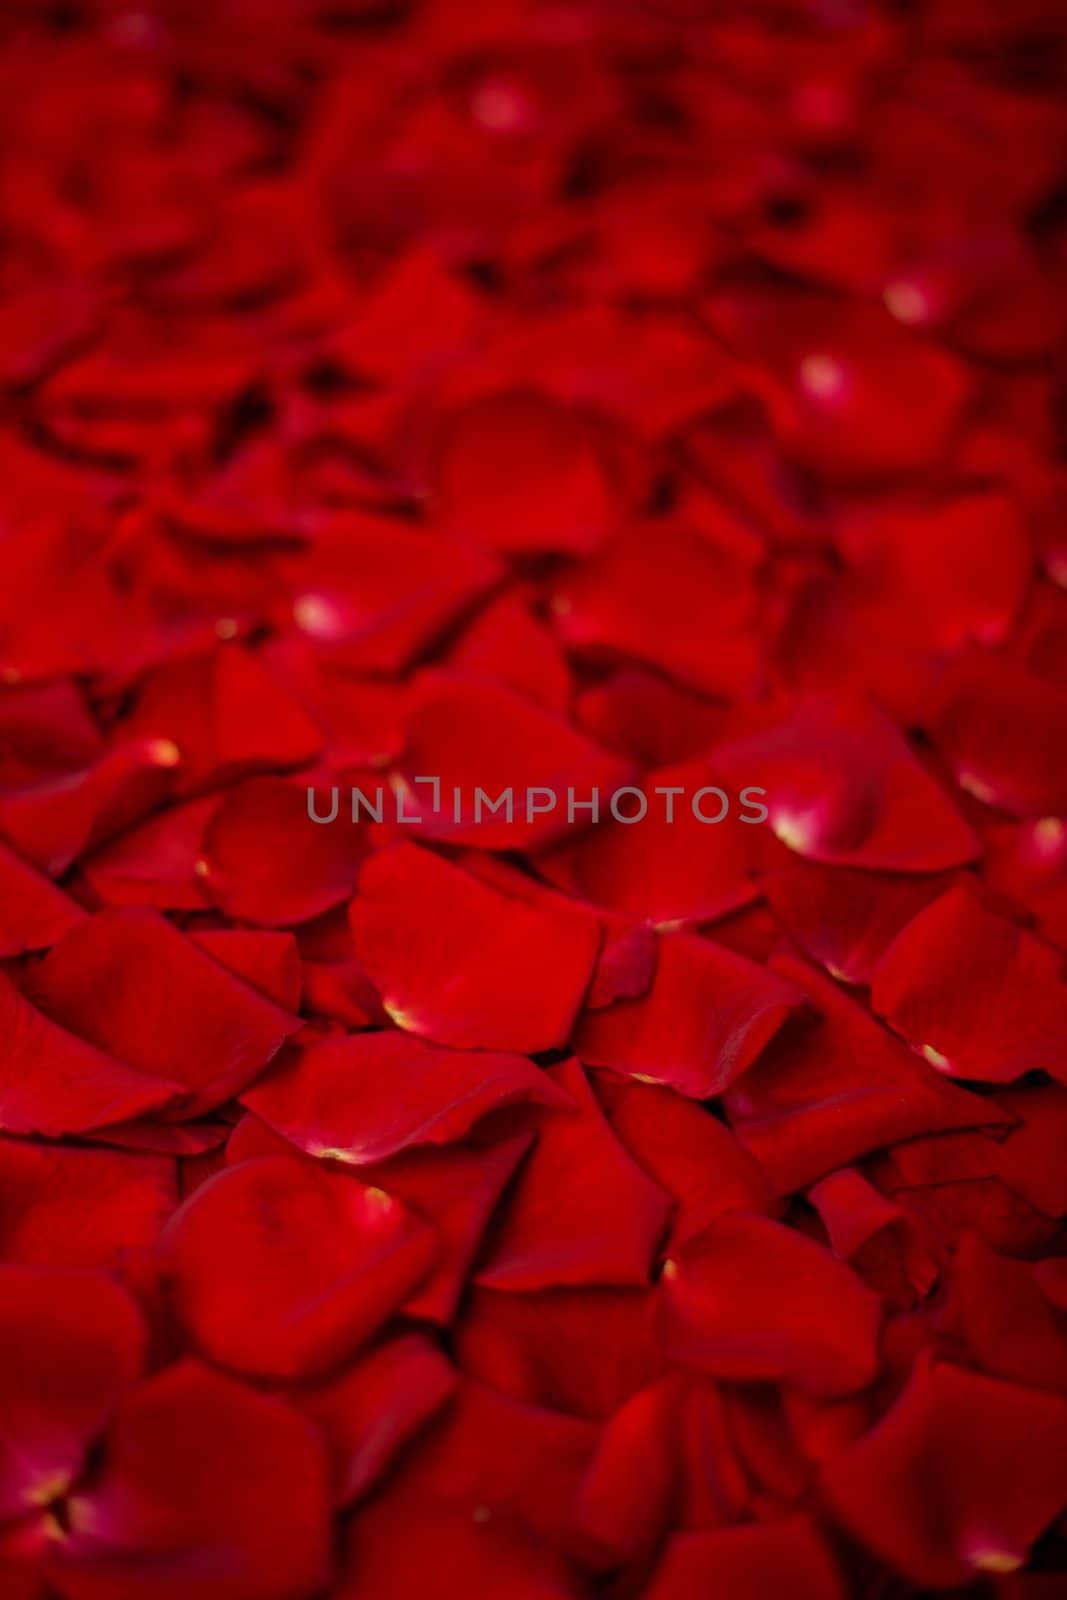 Background of beautiful red rose petals